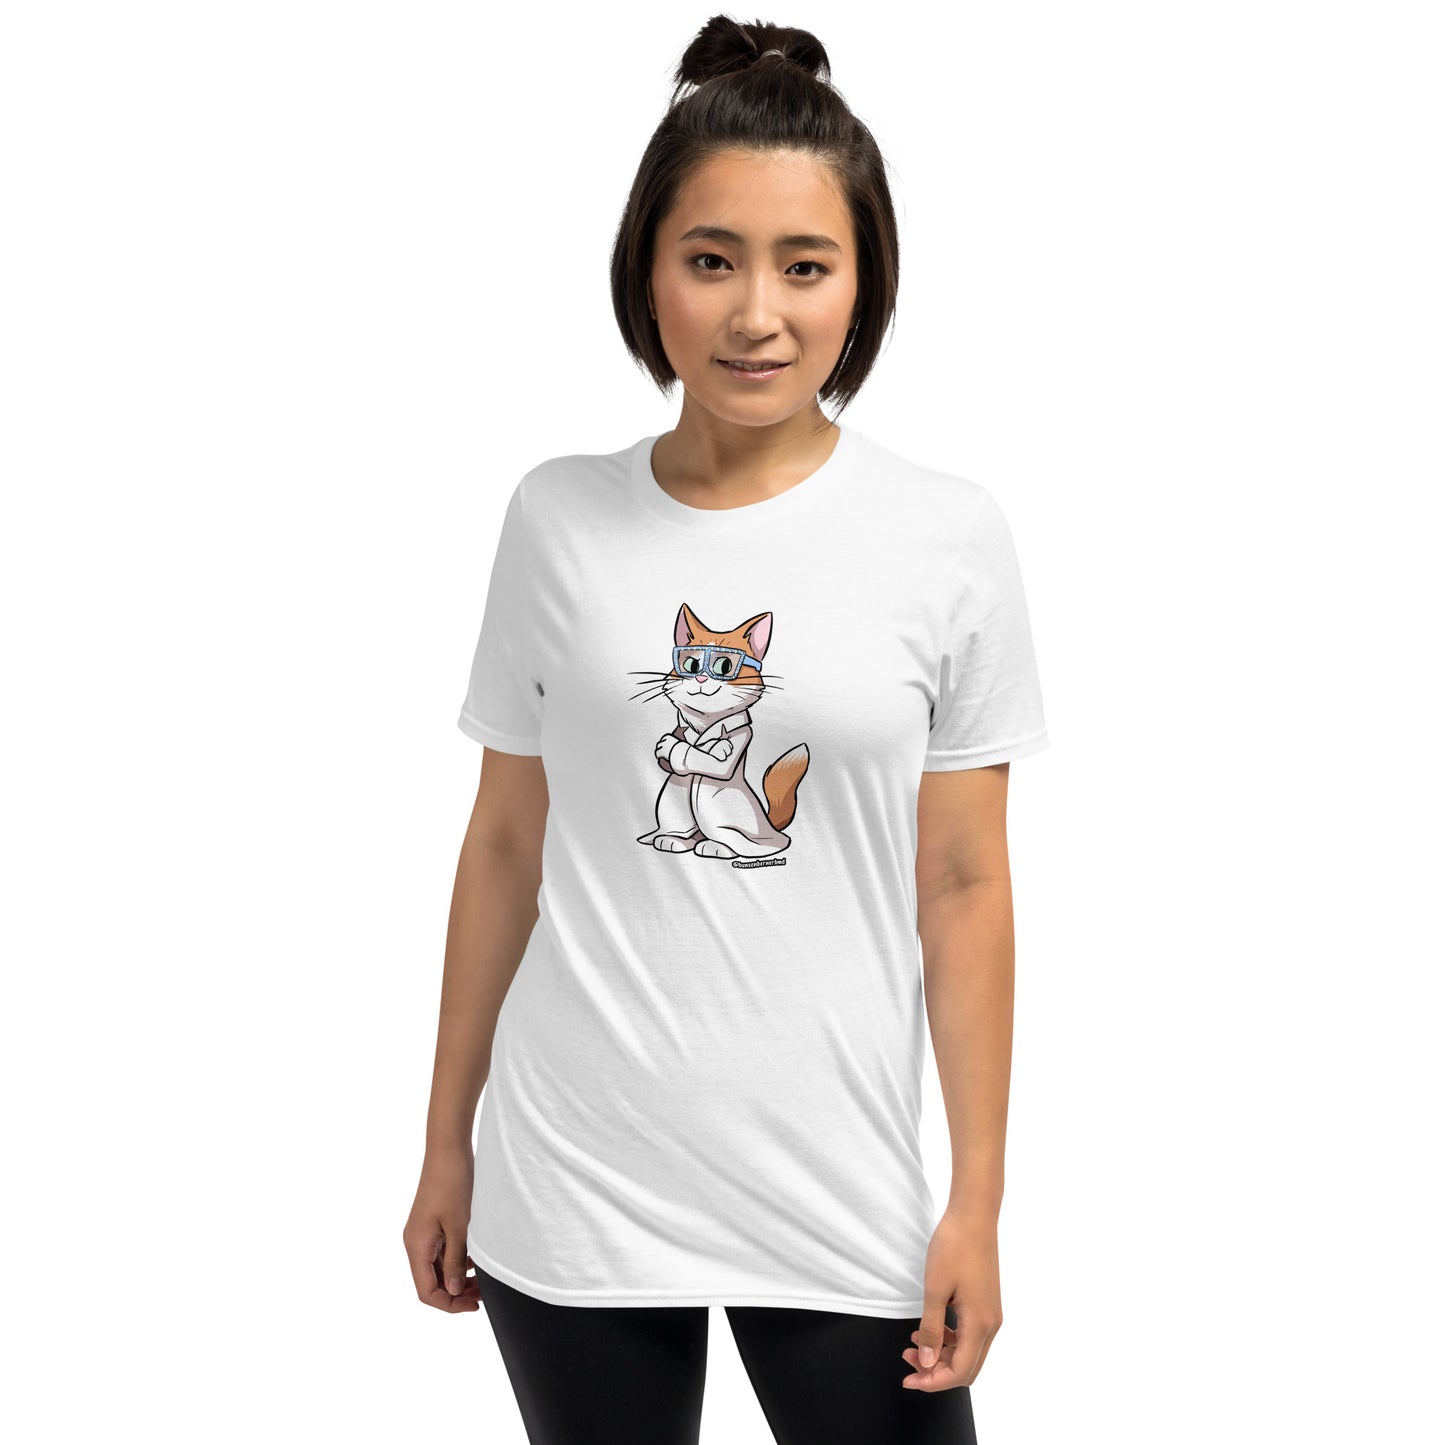 Short-Sleeve Unisex T-Shirt: Ginger Collection